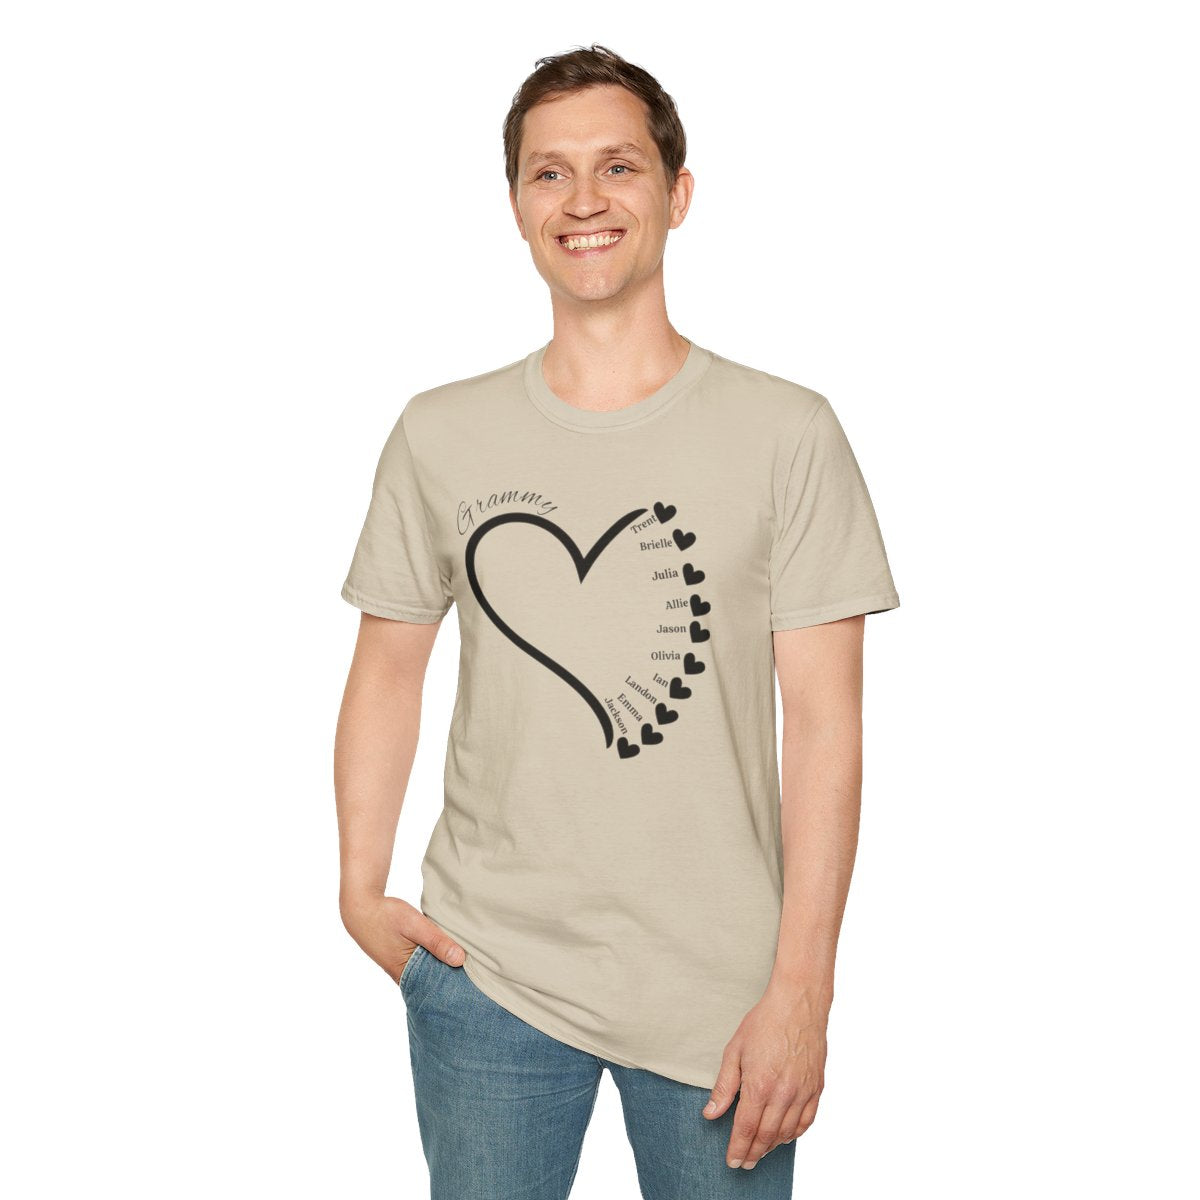 Get trendy with Mama/Grandma Heart of Hearts Unisex Softstyle T-Shirt -  available at Good Gift Company. Grab yours for $9.34 today!